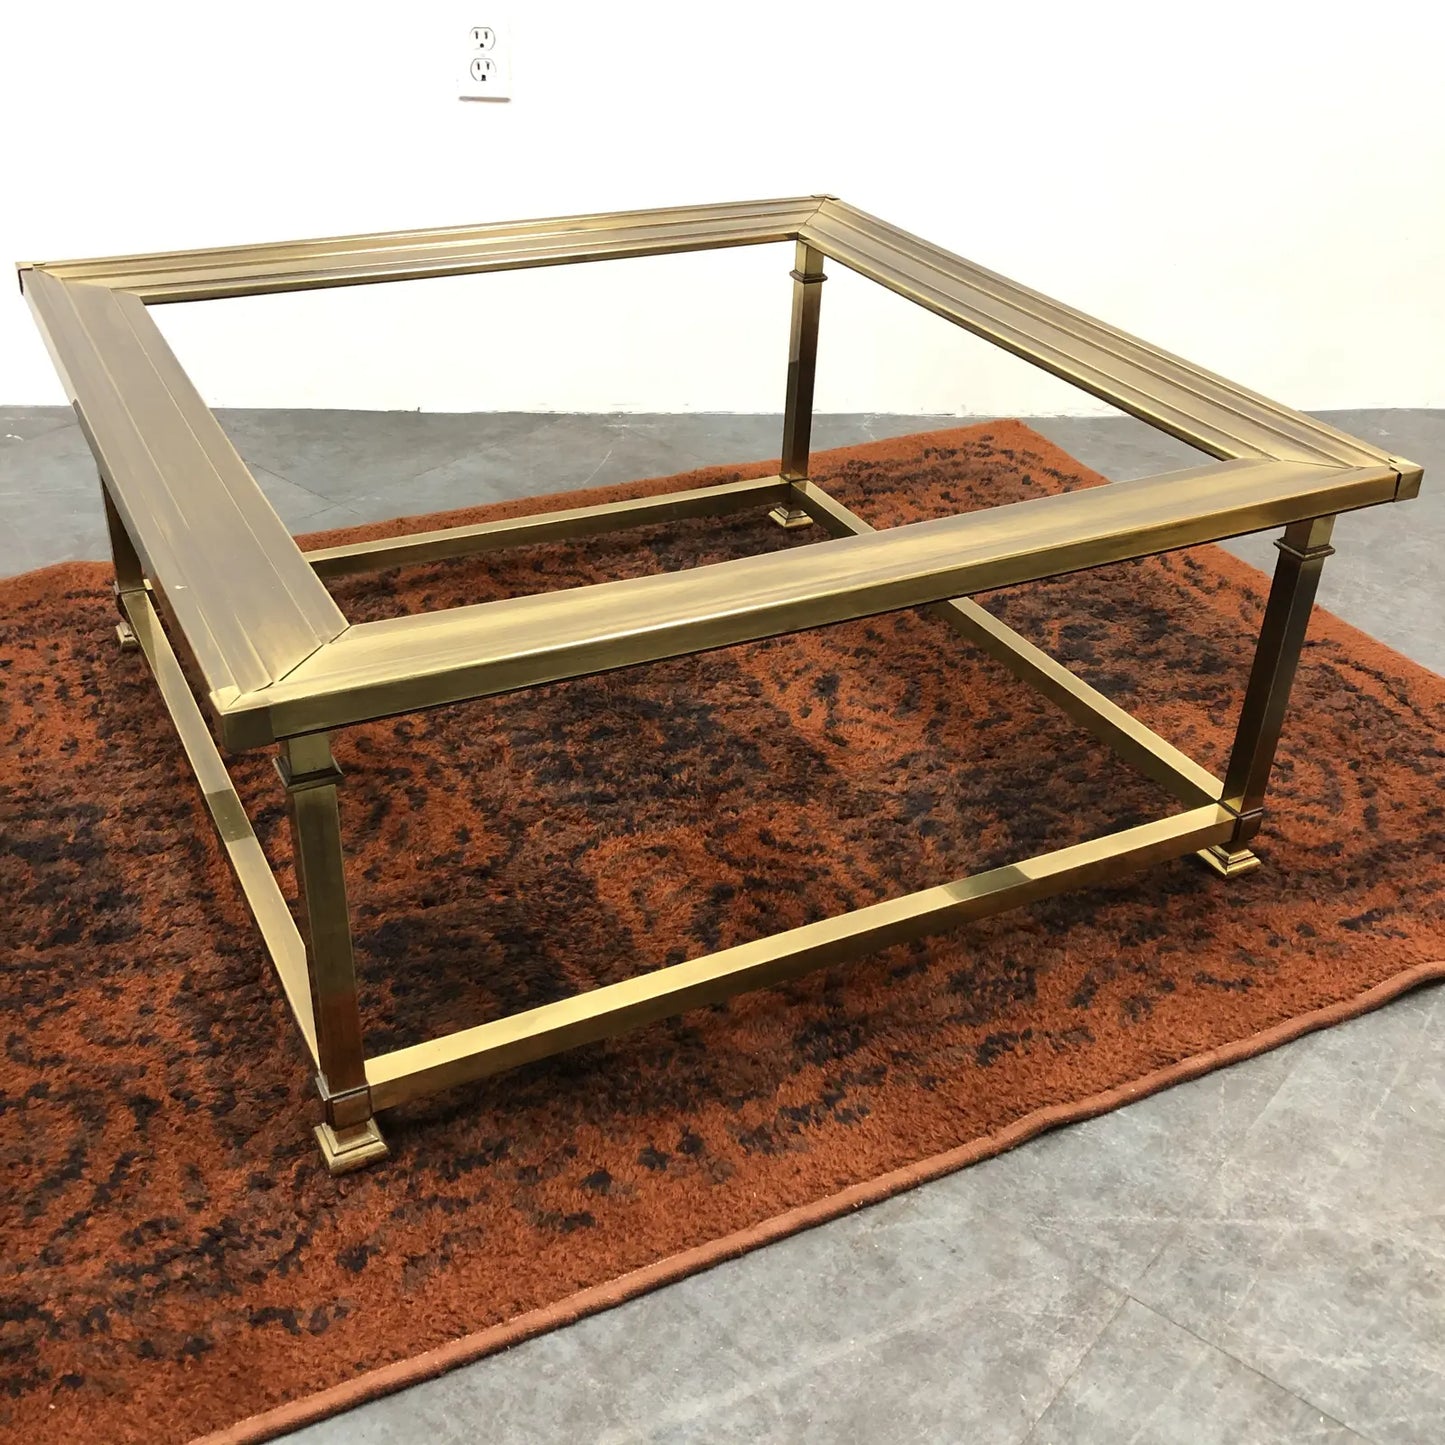 1960S BRASS COFFEE TABLE BY MASTERCRAFT